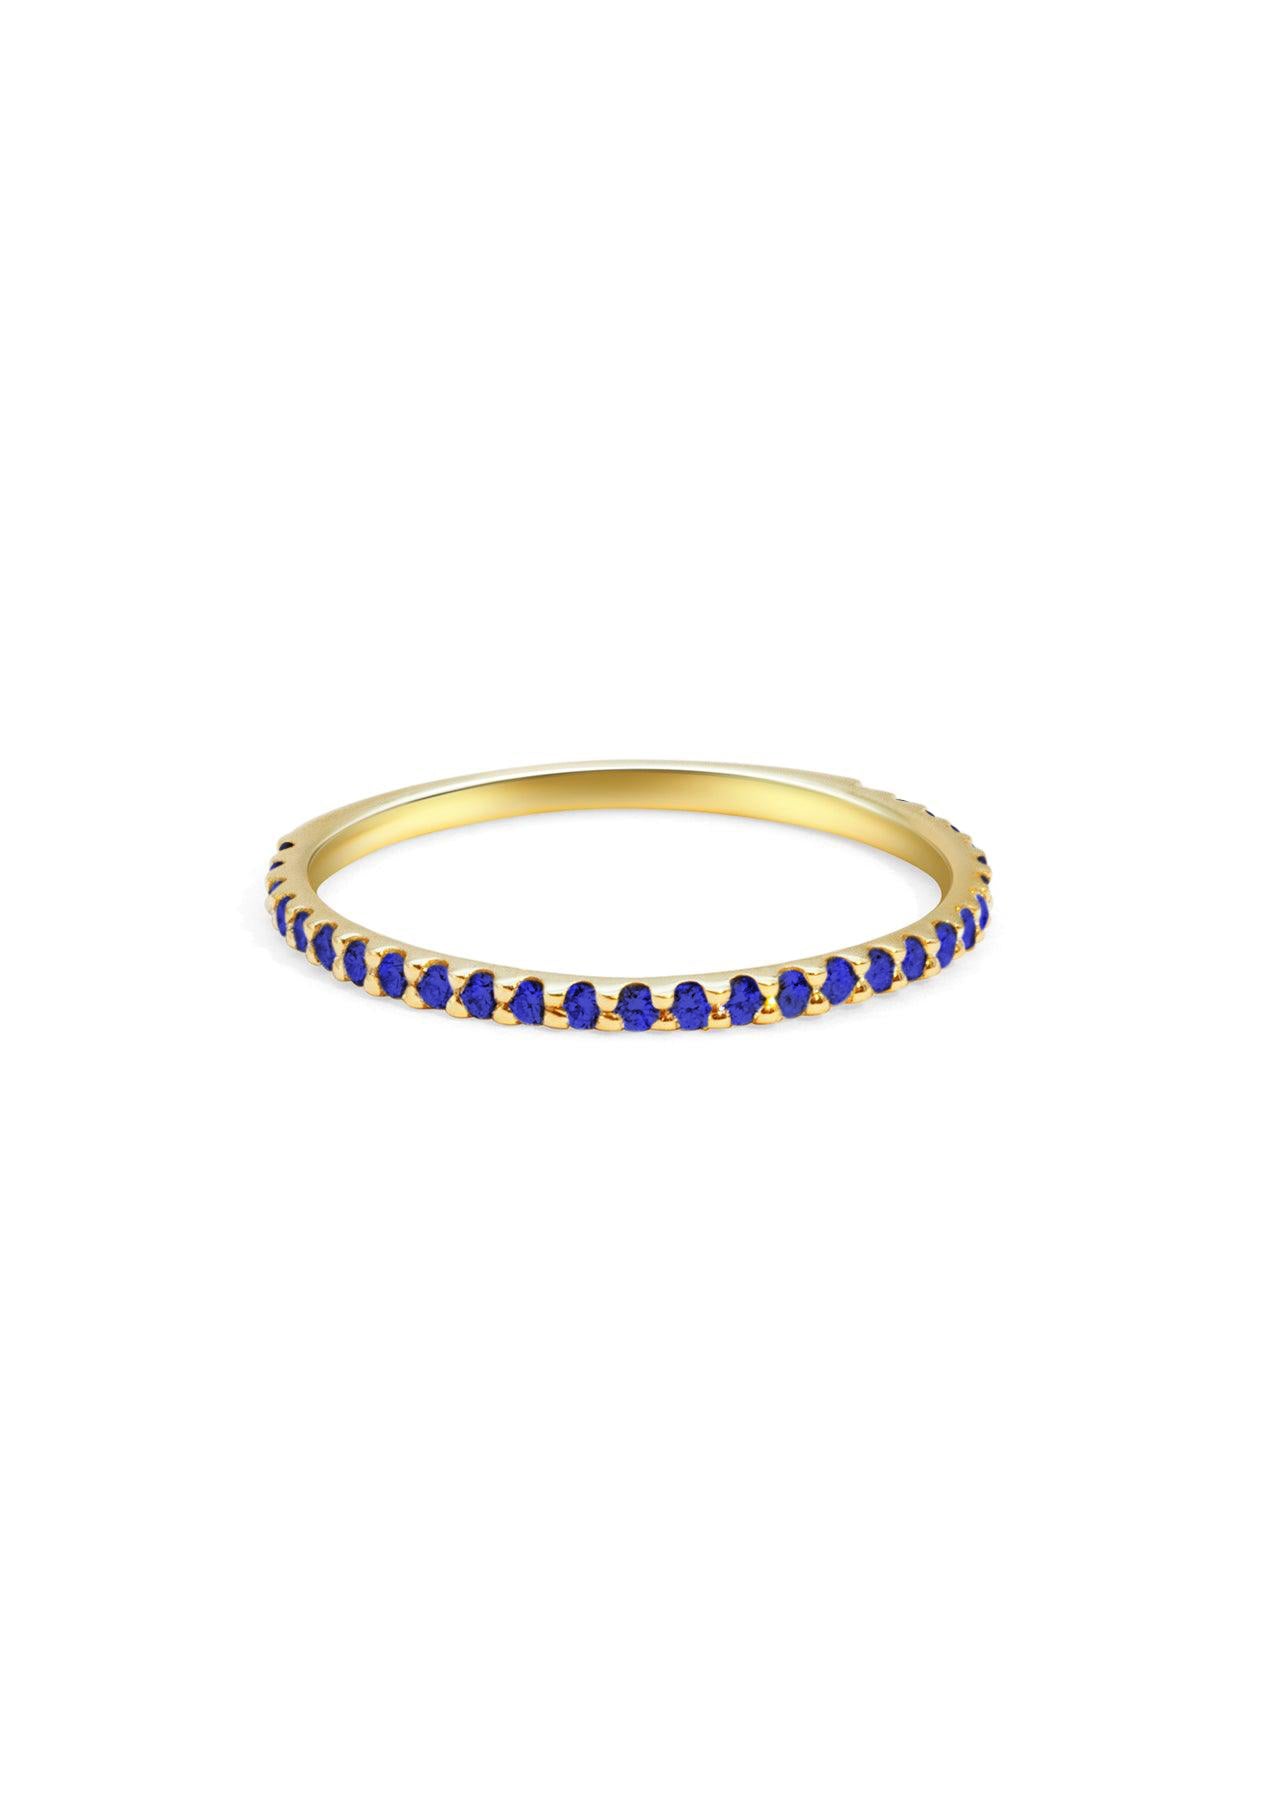 The Mae Sapphire Yellow Gold Band